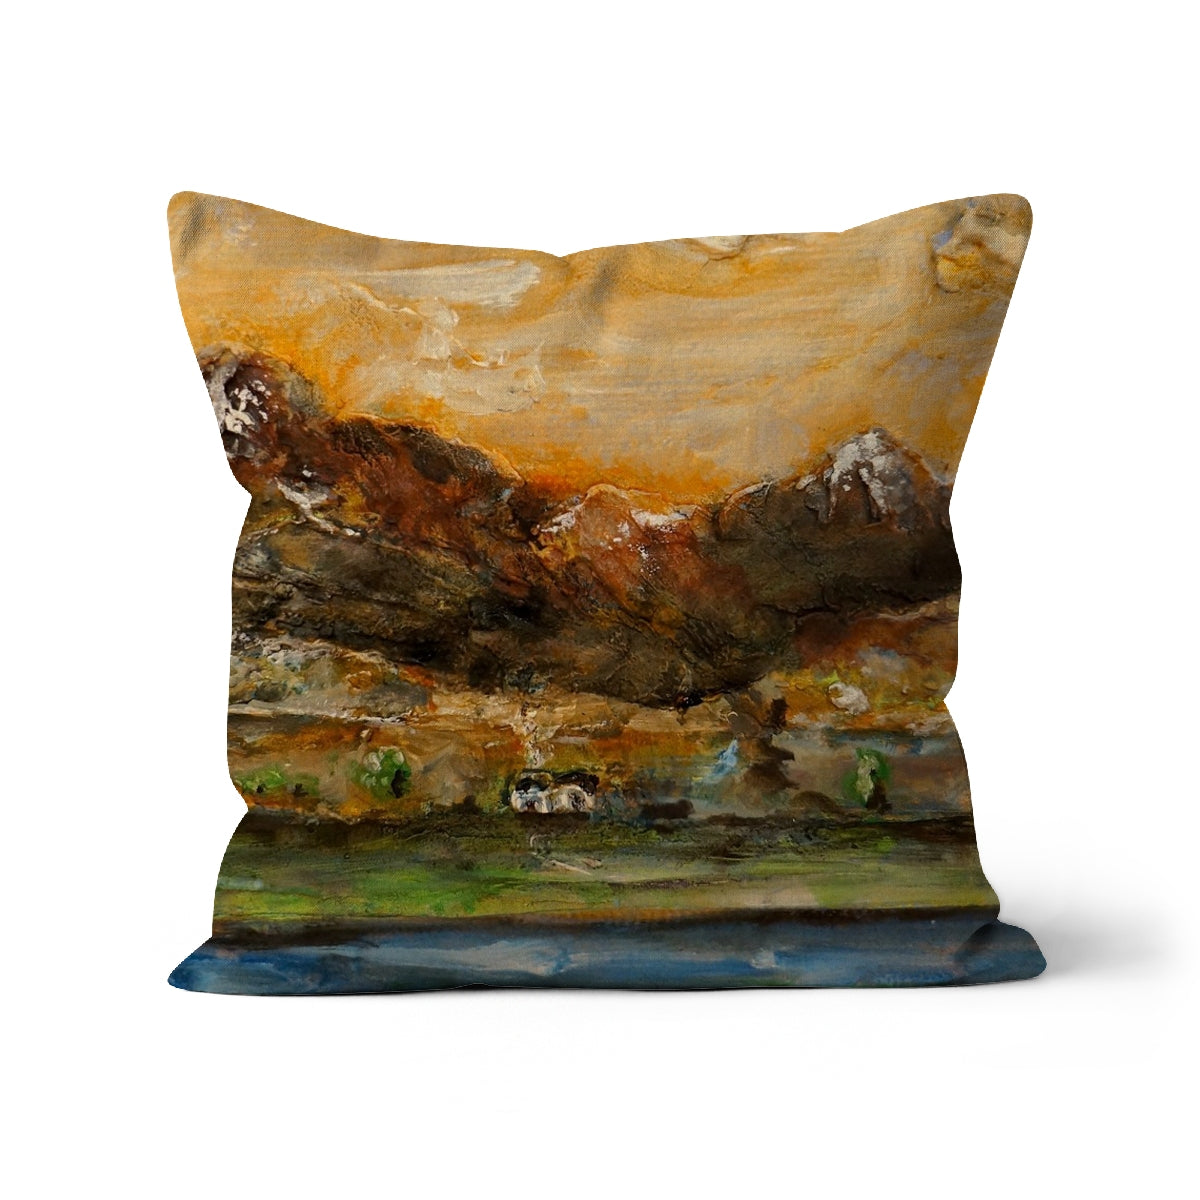 A Glencoe Cottage Art Gifts Cushion-Cushions-Glencoe Art Gallery-Canvas-12"x12"-Paintings, Prints, Homeware, Art Gifts From Scotland By Scottish Artist Kevin Hunter